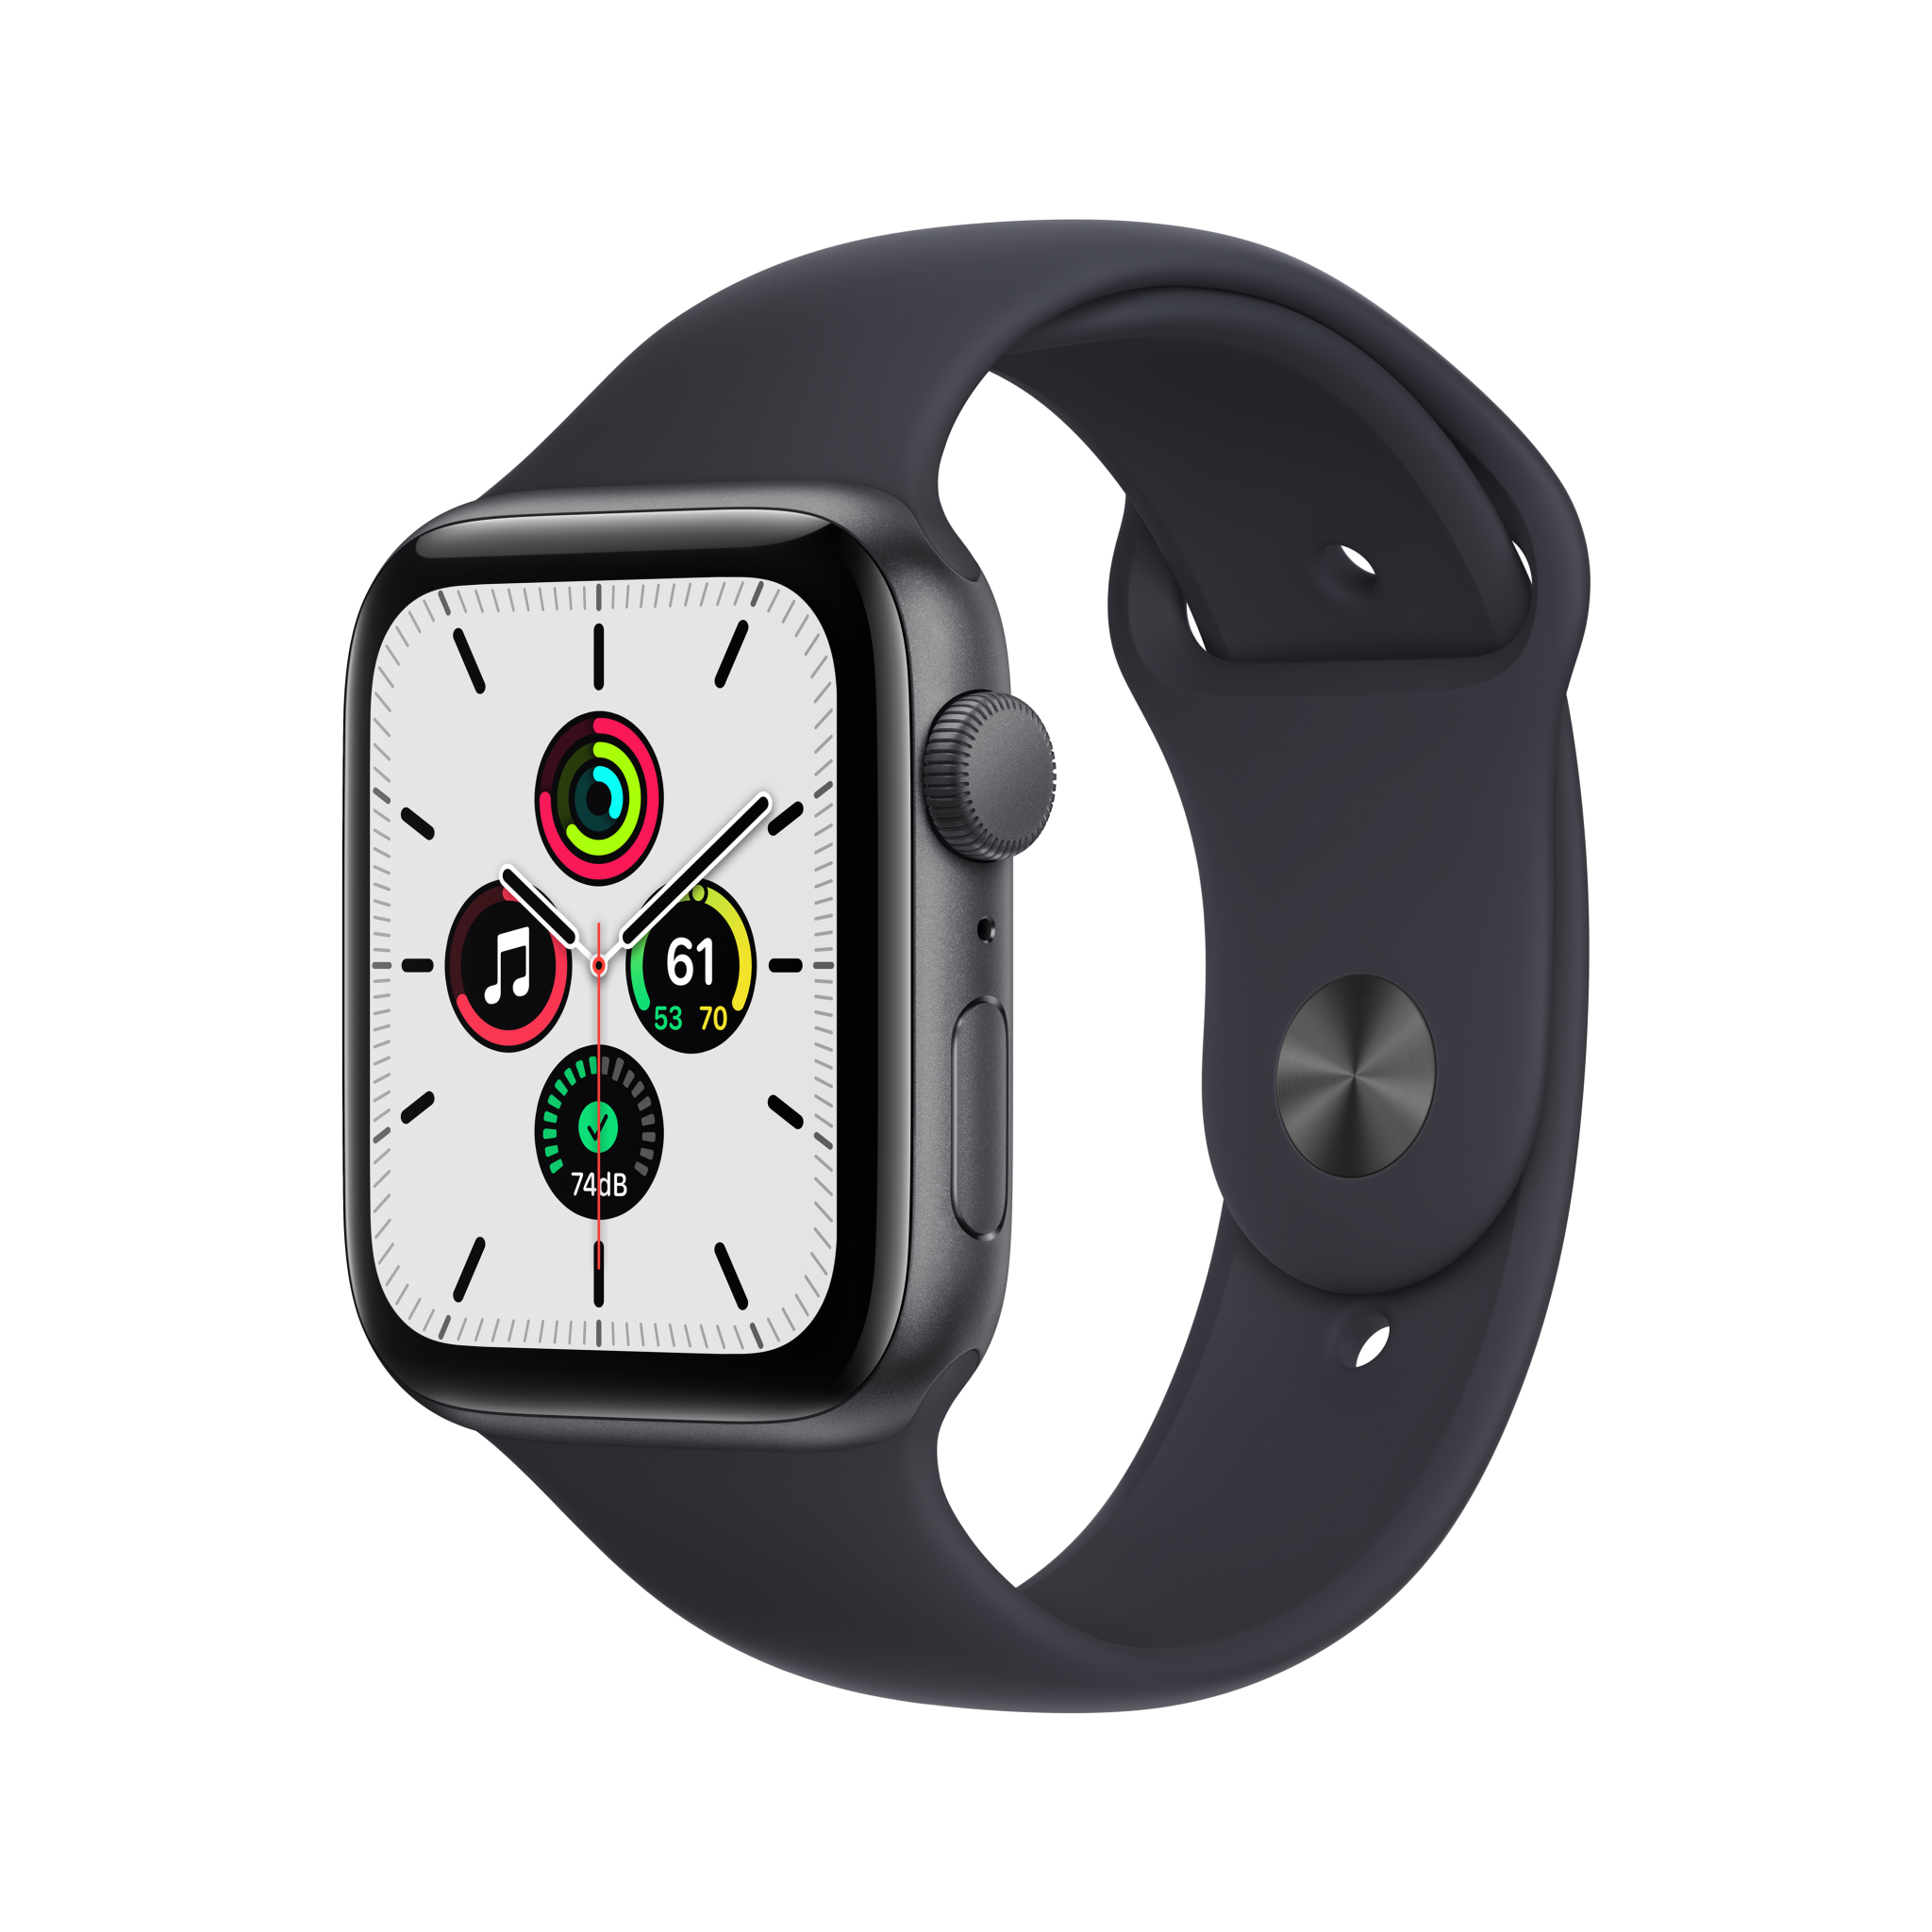 Apple Watch SE (1st Gen) GPS, 44mm Space Gray Aluminum Case with Midnight Sport Band - Regular - image 1 of 9